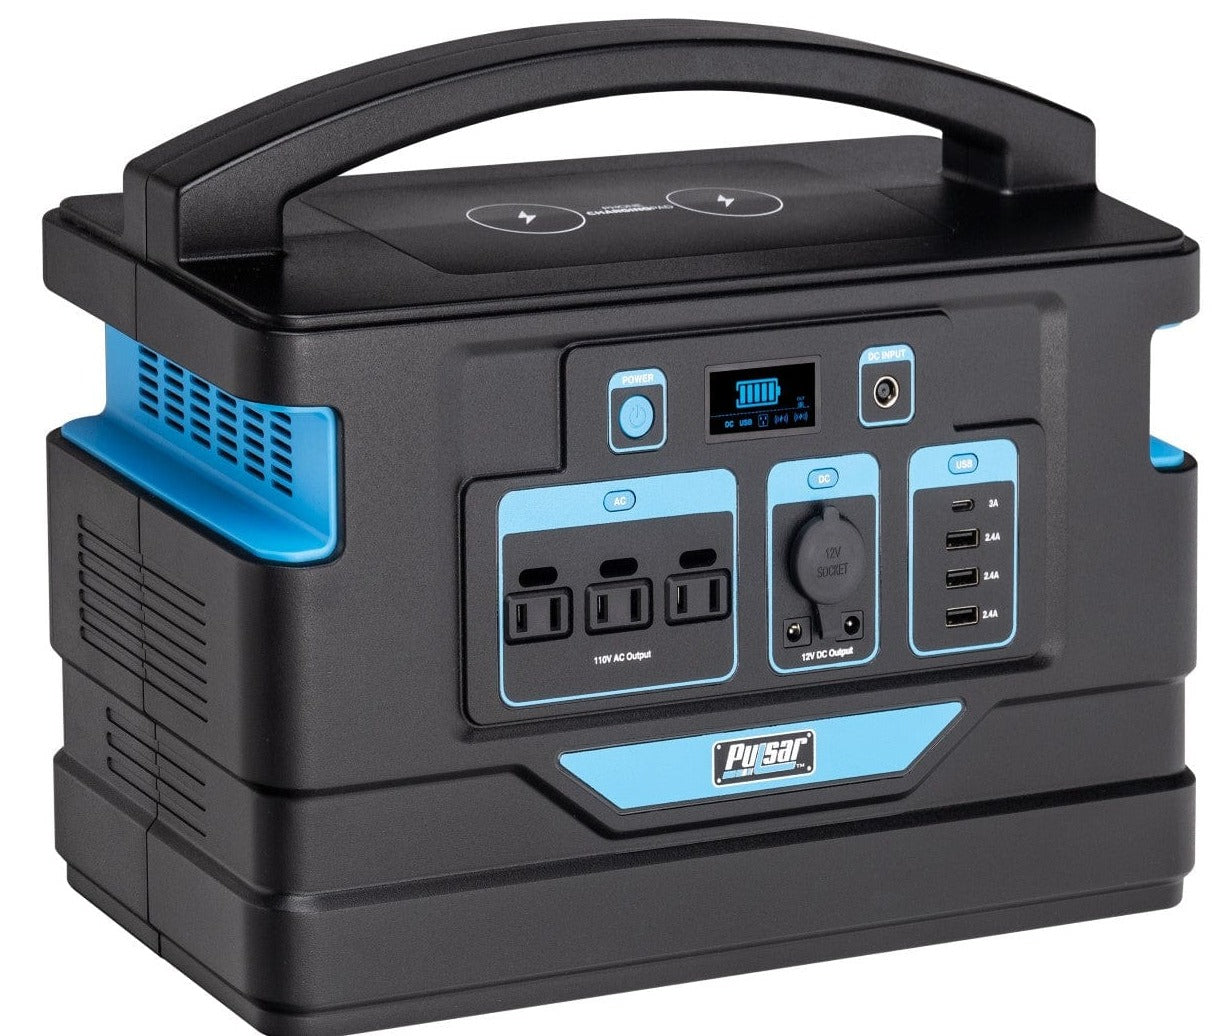 Pulsar 888Wh Portable Power Station